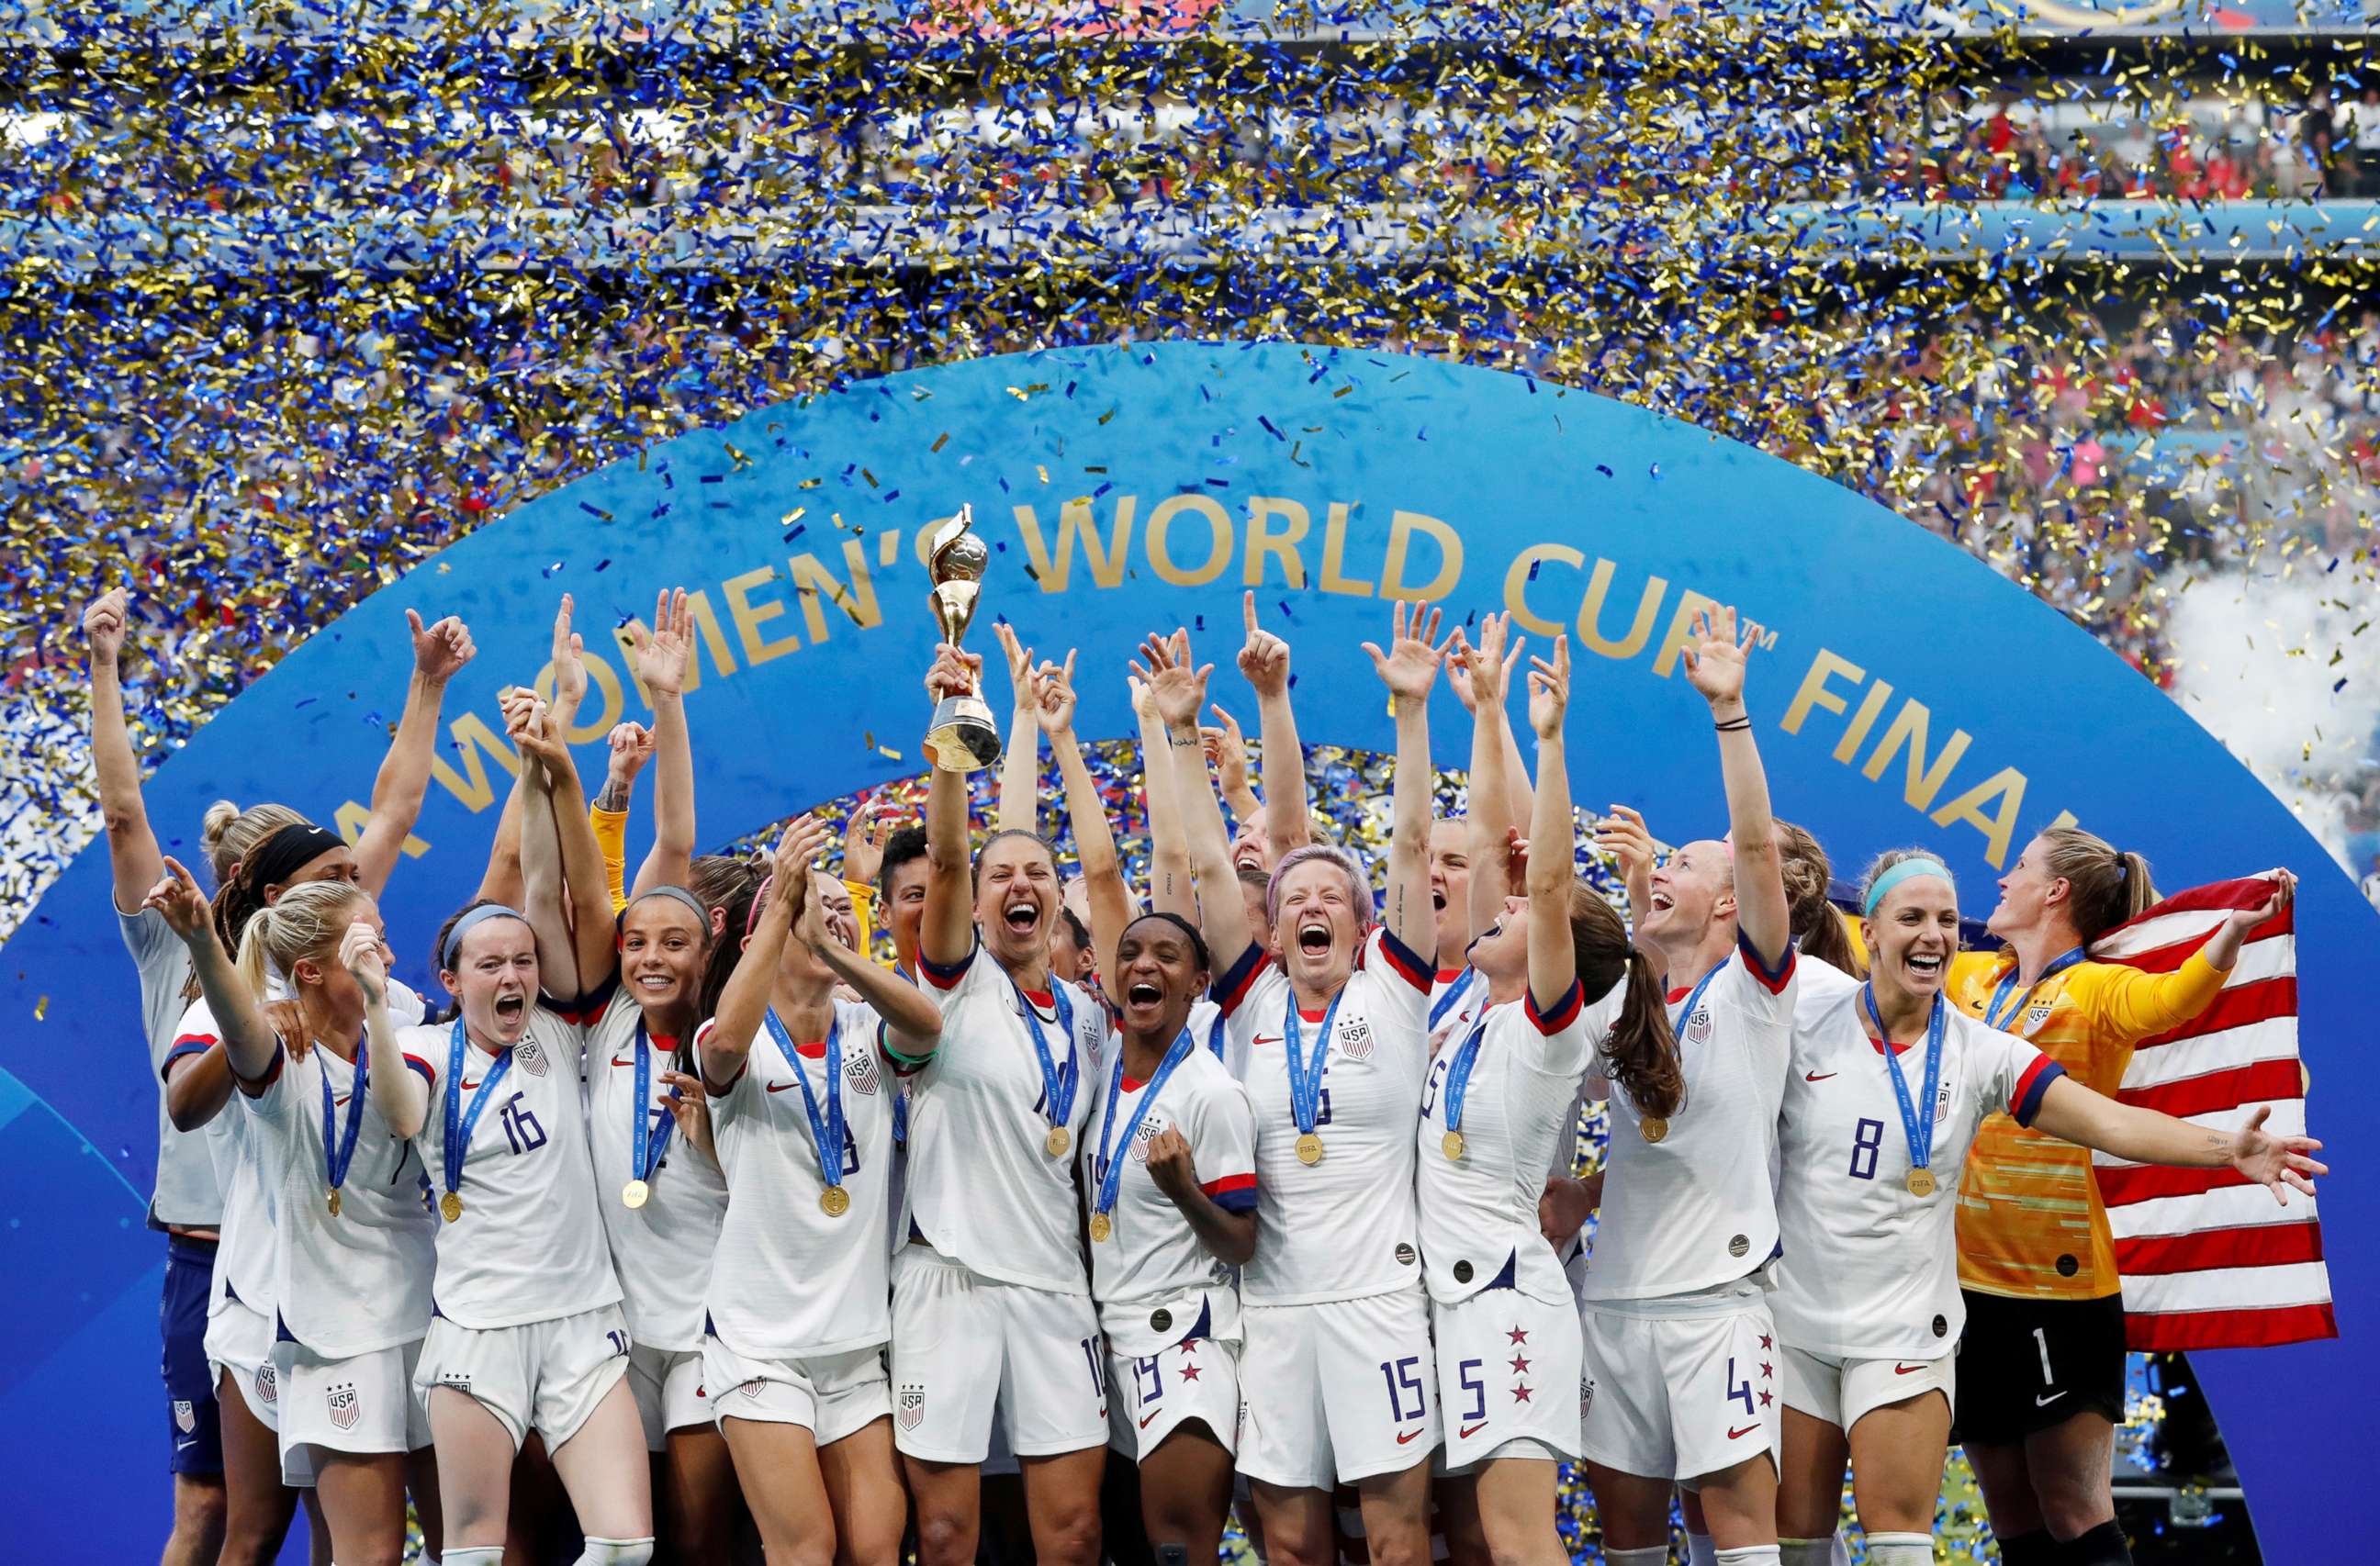 PHOTO: The U.S. Women's National team celebrates winning the Women's World Cup, July 7, 2019 in Lyon, France.